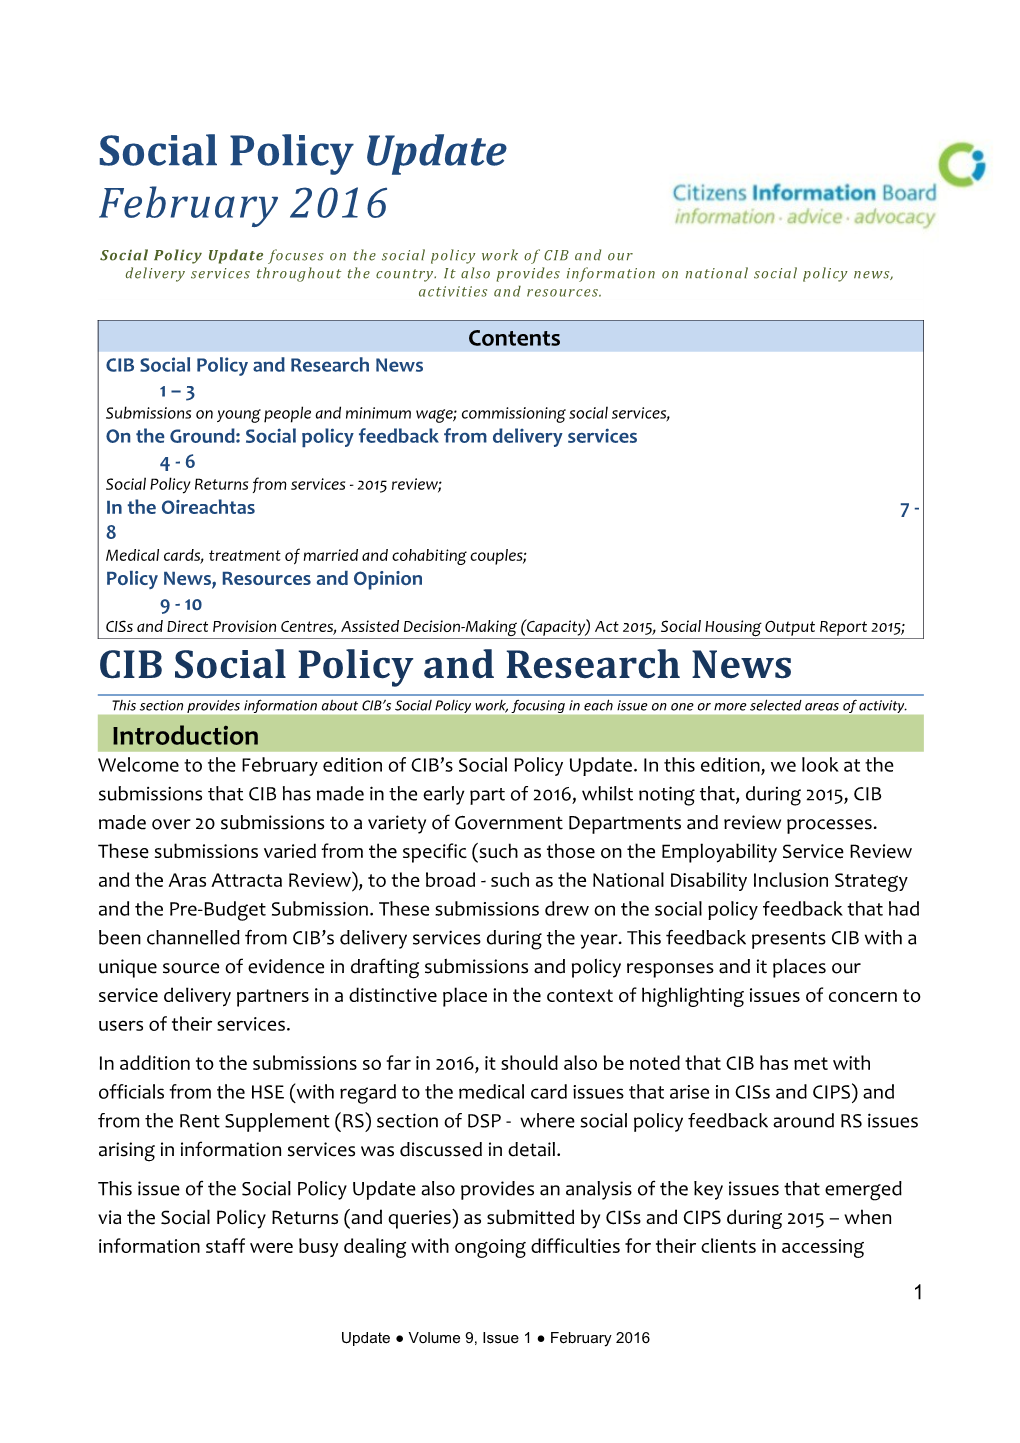 CIB Social Policy and Research News 1 3